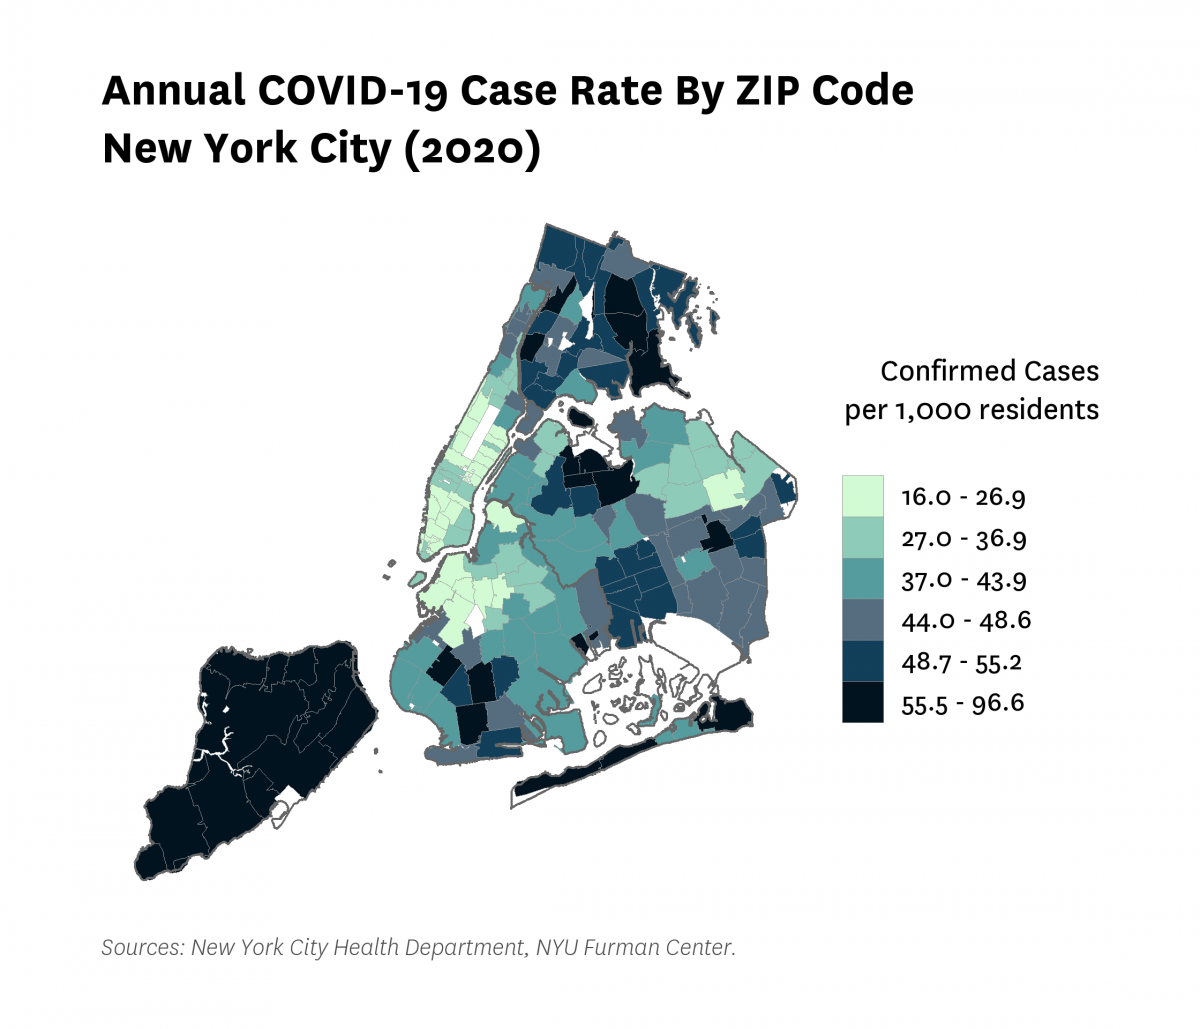 Map of confirmed COVID-19 cases per 1,000 residents in 2020 by zip code in New York City.